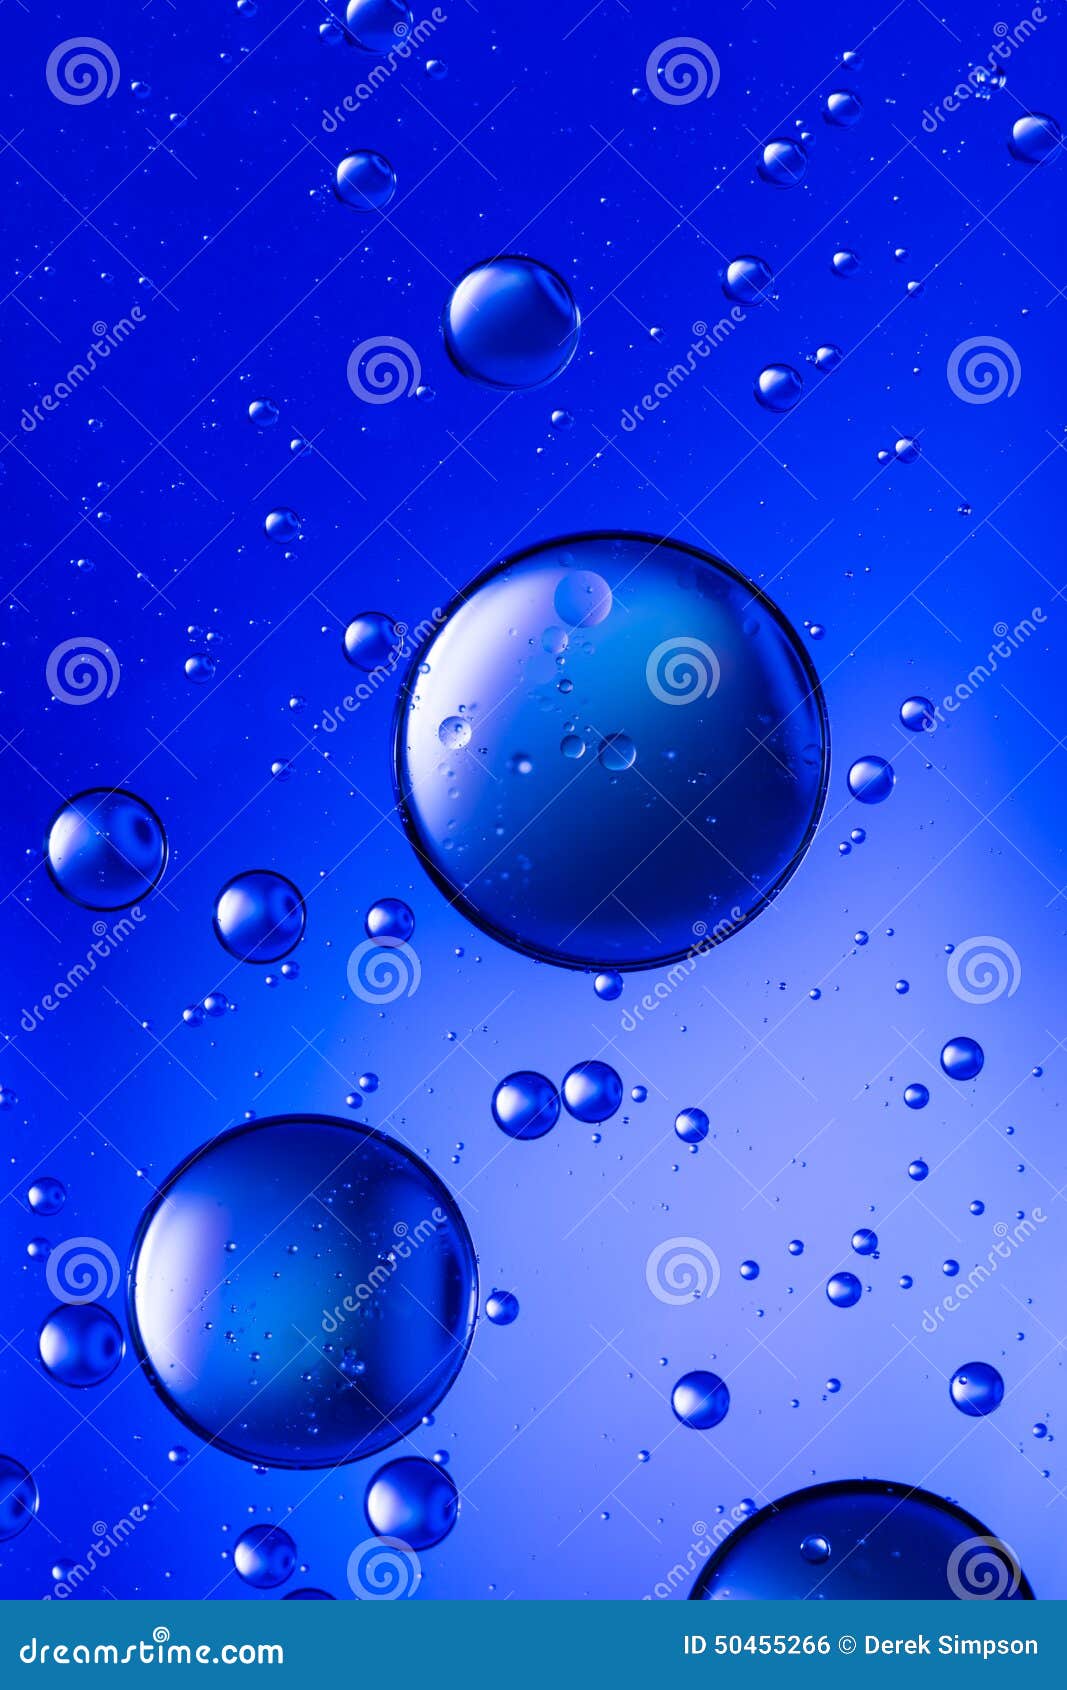 Oil and water, vivid blue. Oil and water abstract in vivid blue, creating an effect like rising bubbles